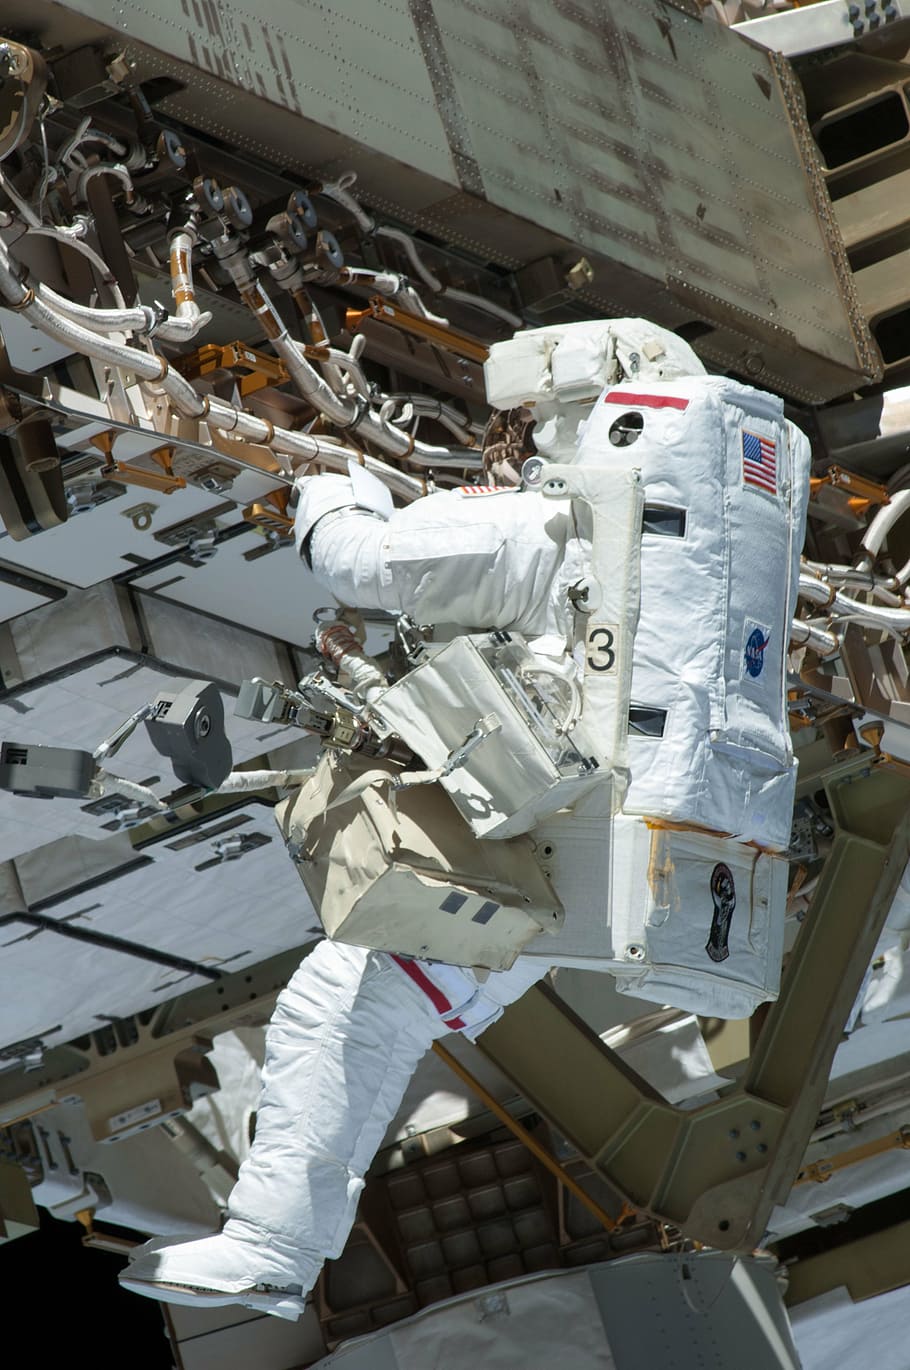 astronaut, spacewalk, space shuttle, discovery, tools, suit, pack, tether, floating, job